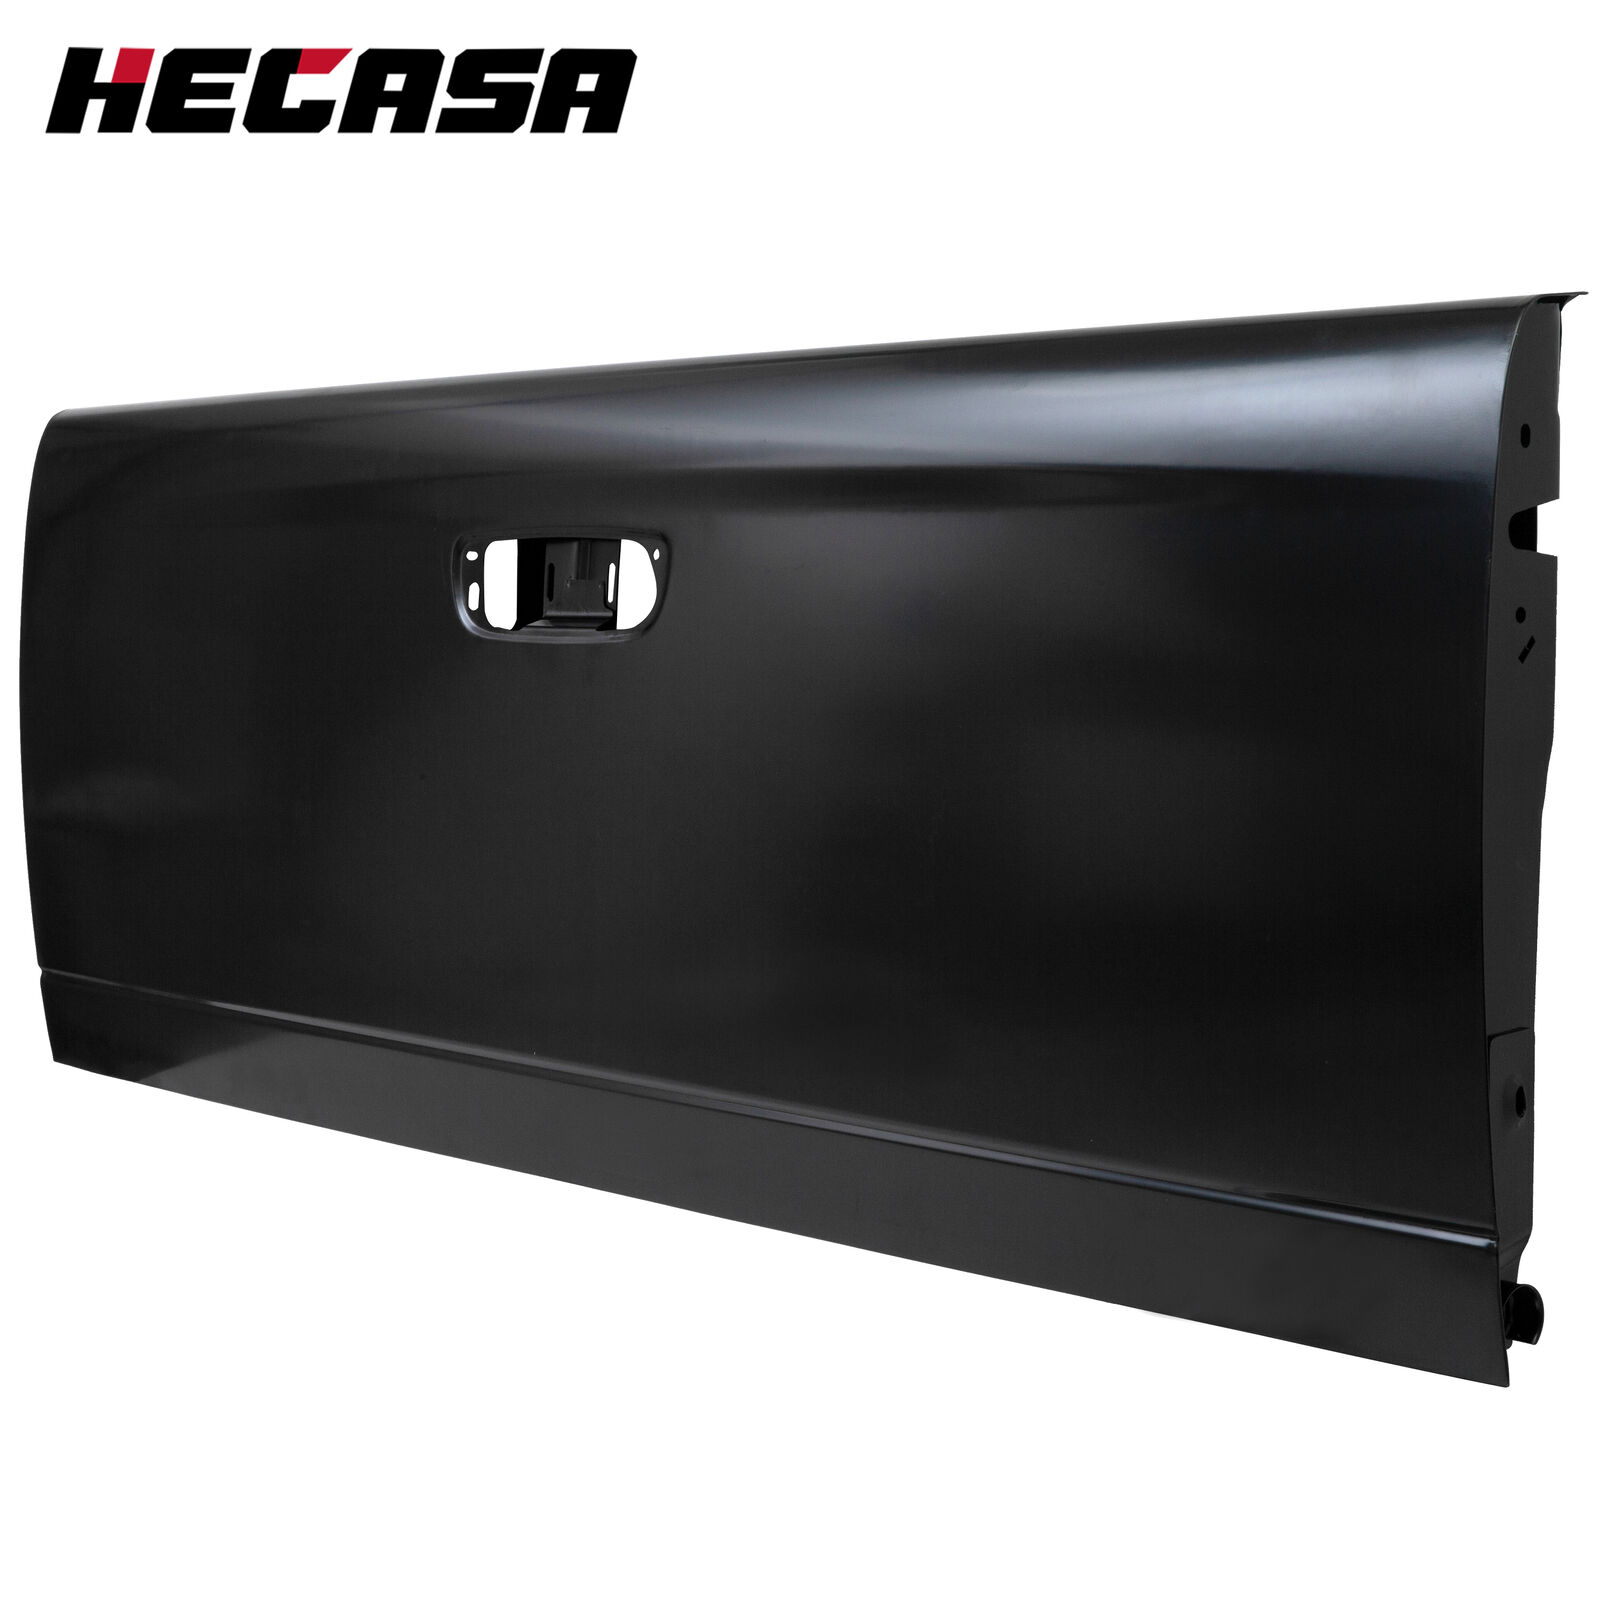 HECASA Steel Rear Tailgate Replacement For Dodge RAM 1500 2500 3500 2002-2009